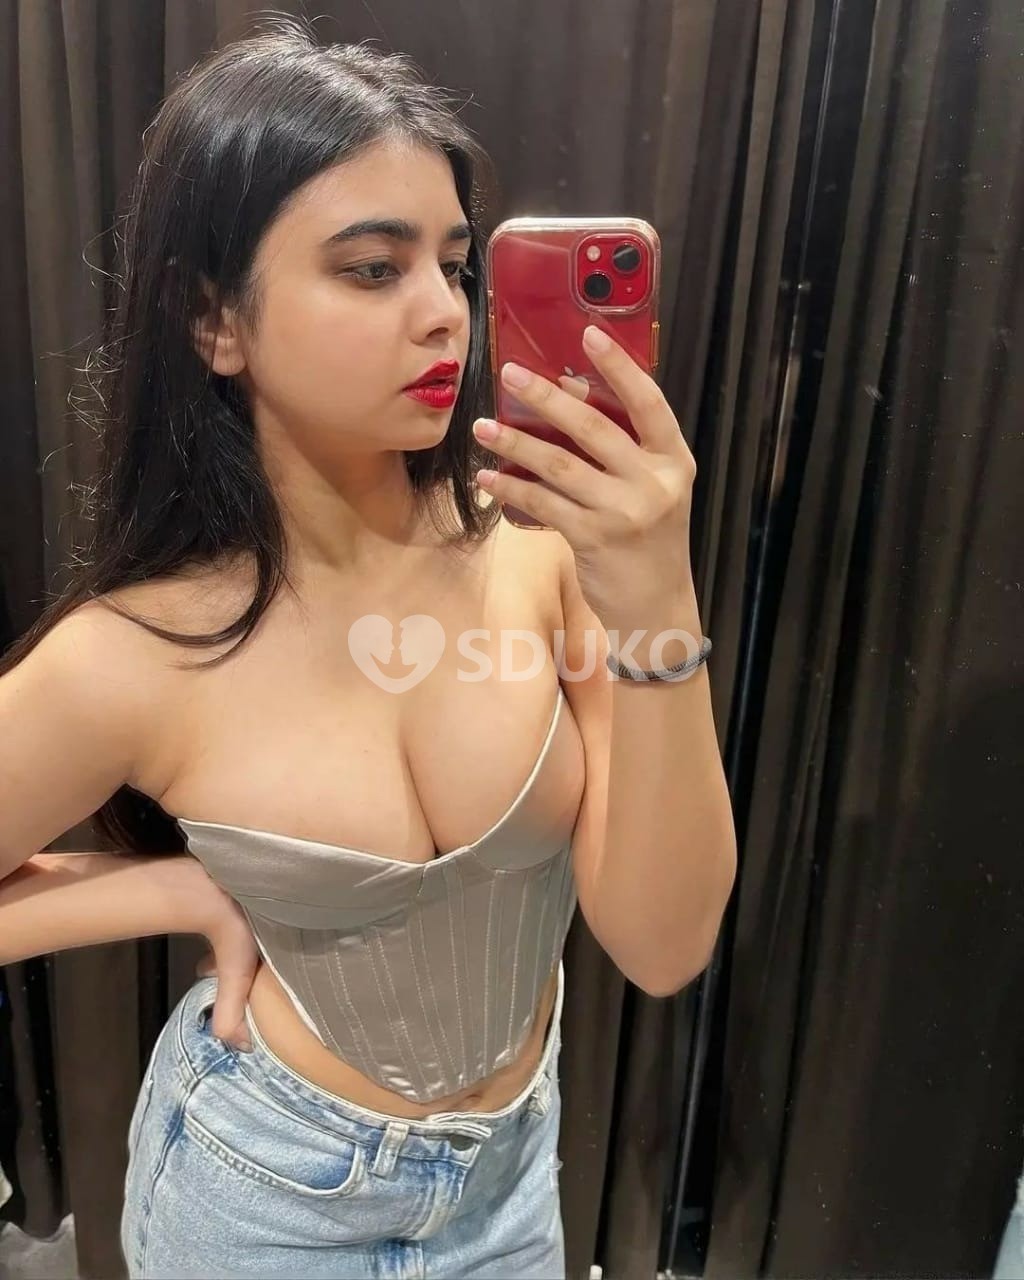 Viman nagar❤️24x7 AFFORDABLE CHEAPEST RATE SAFE CALL GIRL SERVICE